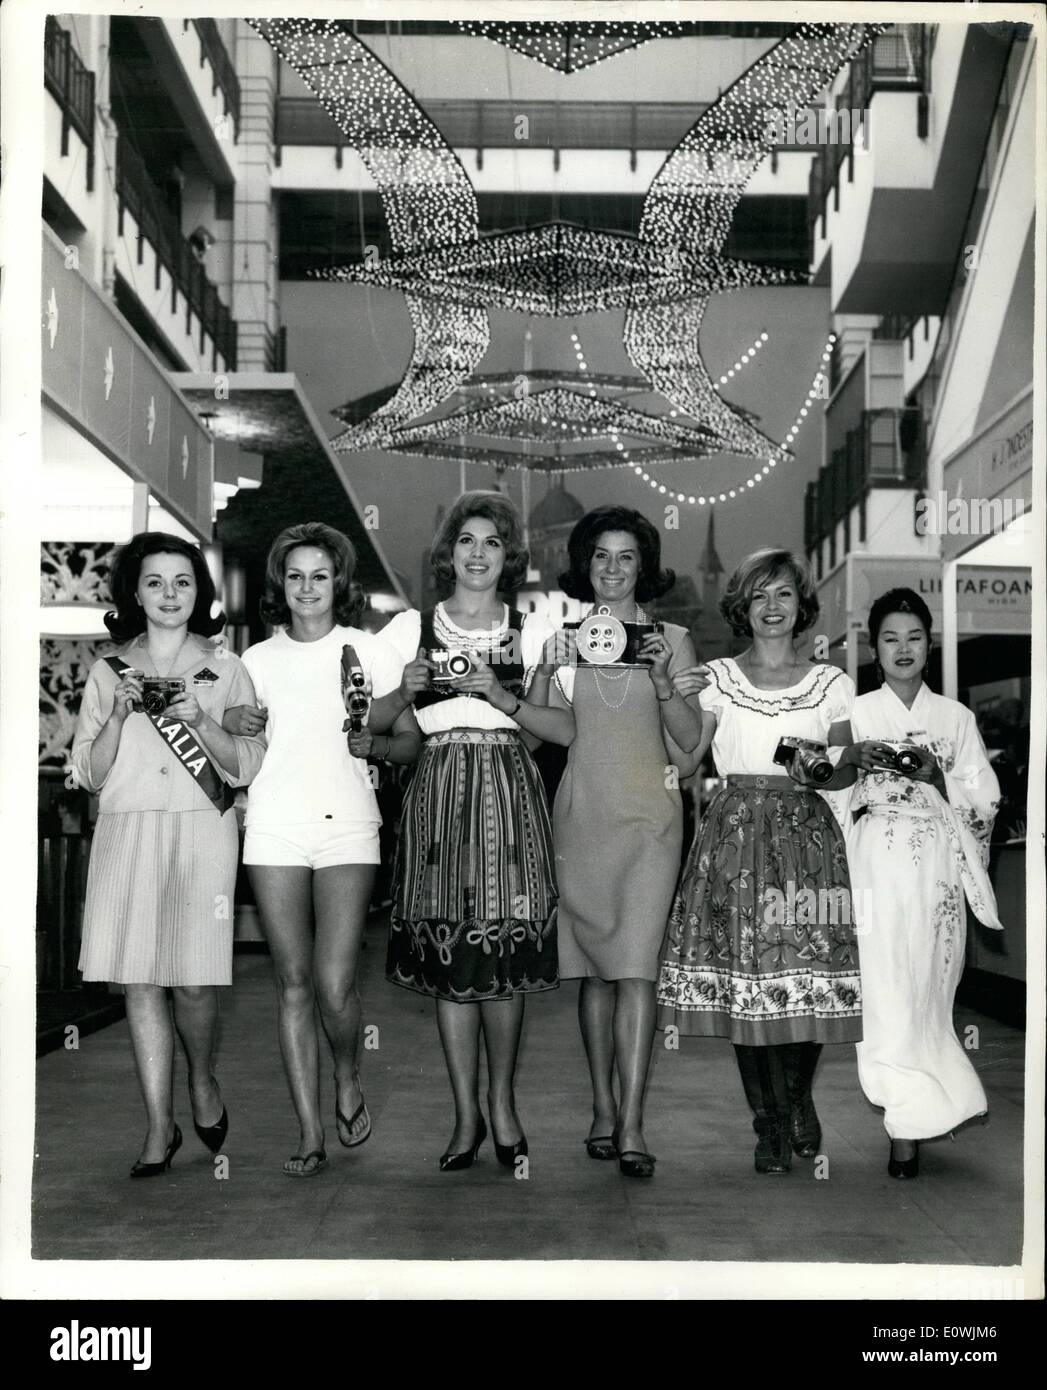 Mar. 04, 1963 - 4-3-63 International Lovelies at The Ideal Homes Exhibition. A Press view was held at Olympia this morning for the Ideal Homes Exhibition which opens there tomorrow. Keystone Photo Shows: Lovely young ladies from many countries in their National Dress and complete with cameras as they walk around the Exhibition today. They are L-R: Rhonda Finlayson (Australia); Janet Dale (Australia); Lilian Blagojevic (Russia); Pat Stewart (U.S.A.); Marianne Brauns (Germany); and Yule Thein of Japan. Stock Photo